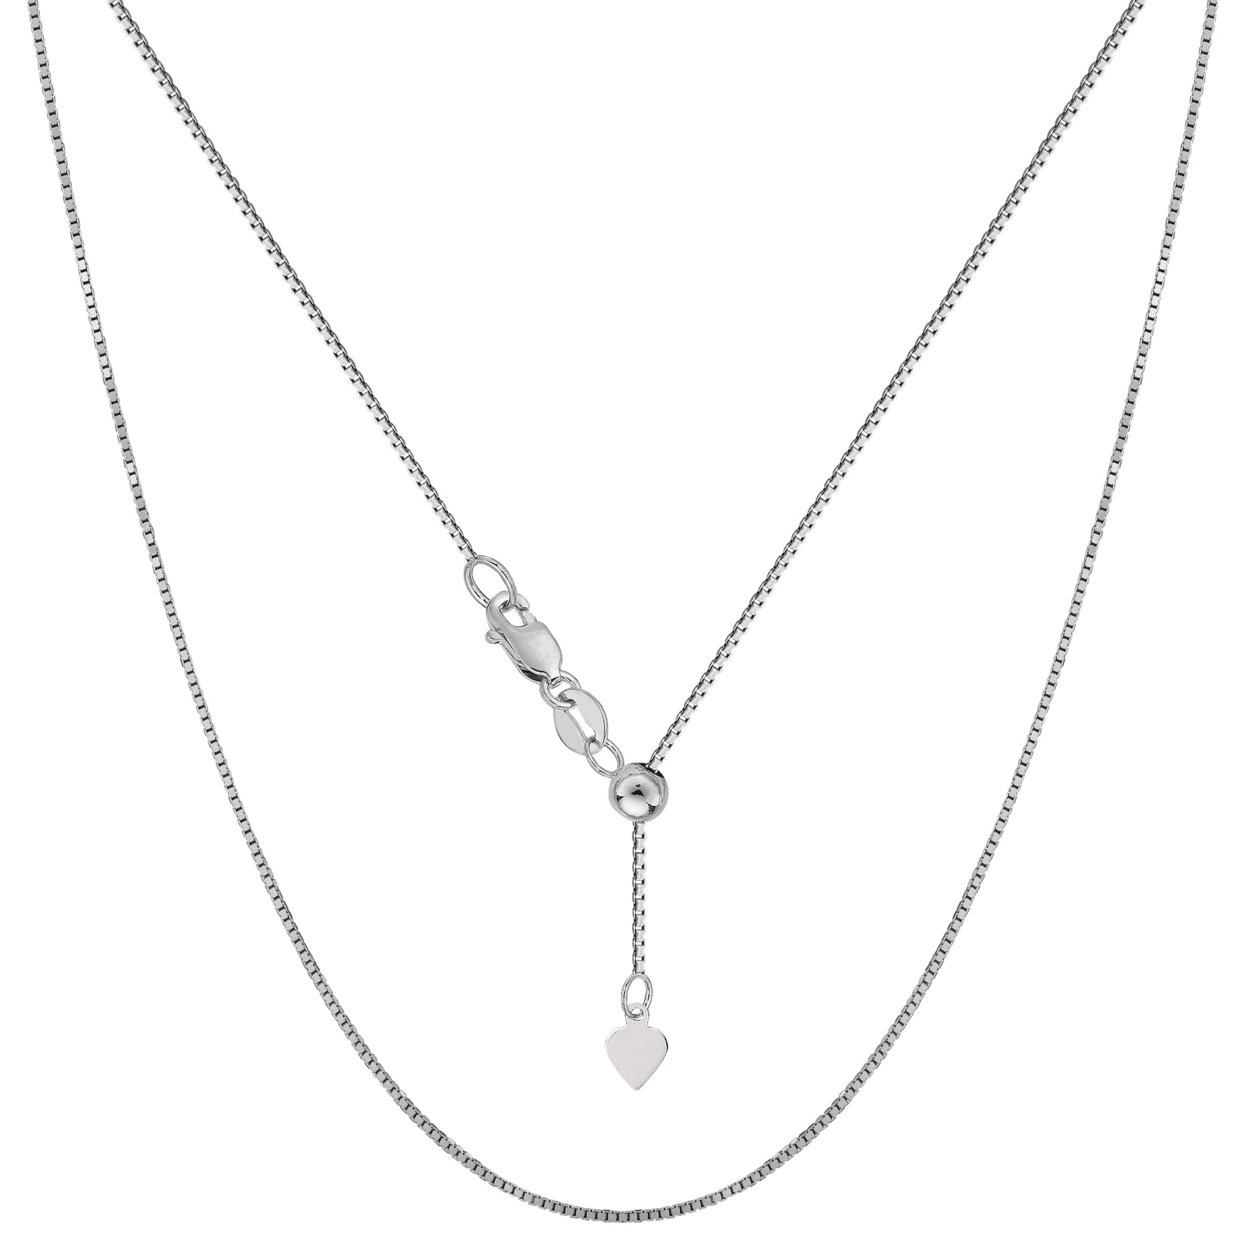 JewelryAffairs 14k White Gold Adjustable Box Link Chain Necklace, 0.7mm, 22"